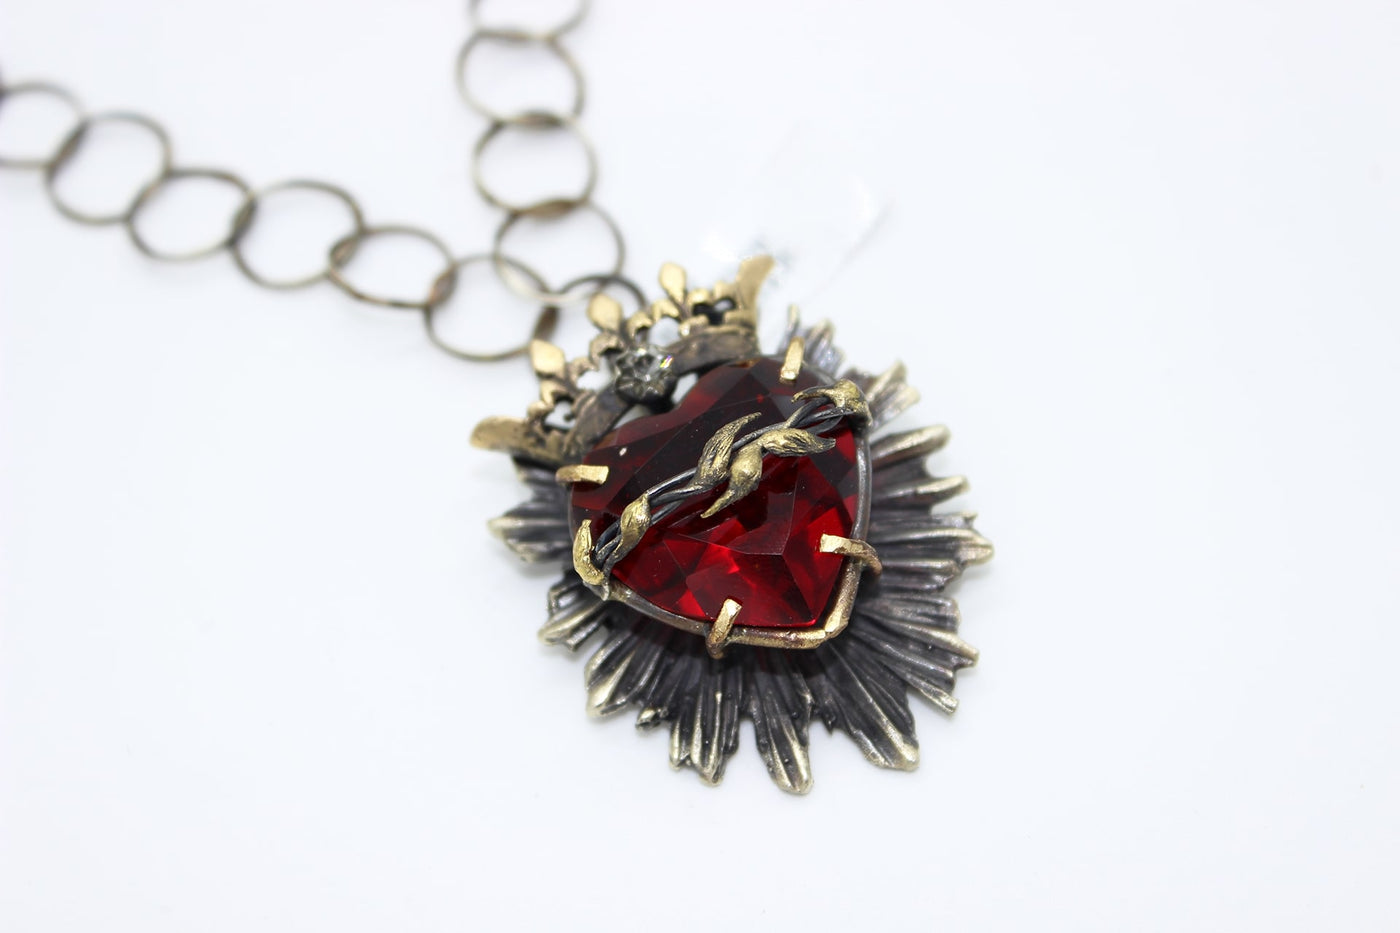 CORAZON SAGRADO NECKLACE WITH HAND FACETED GLASS